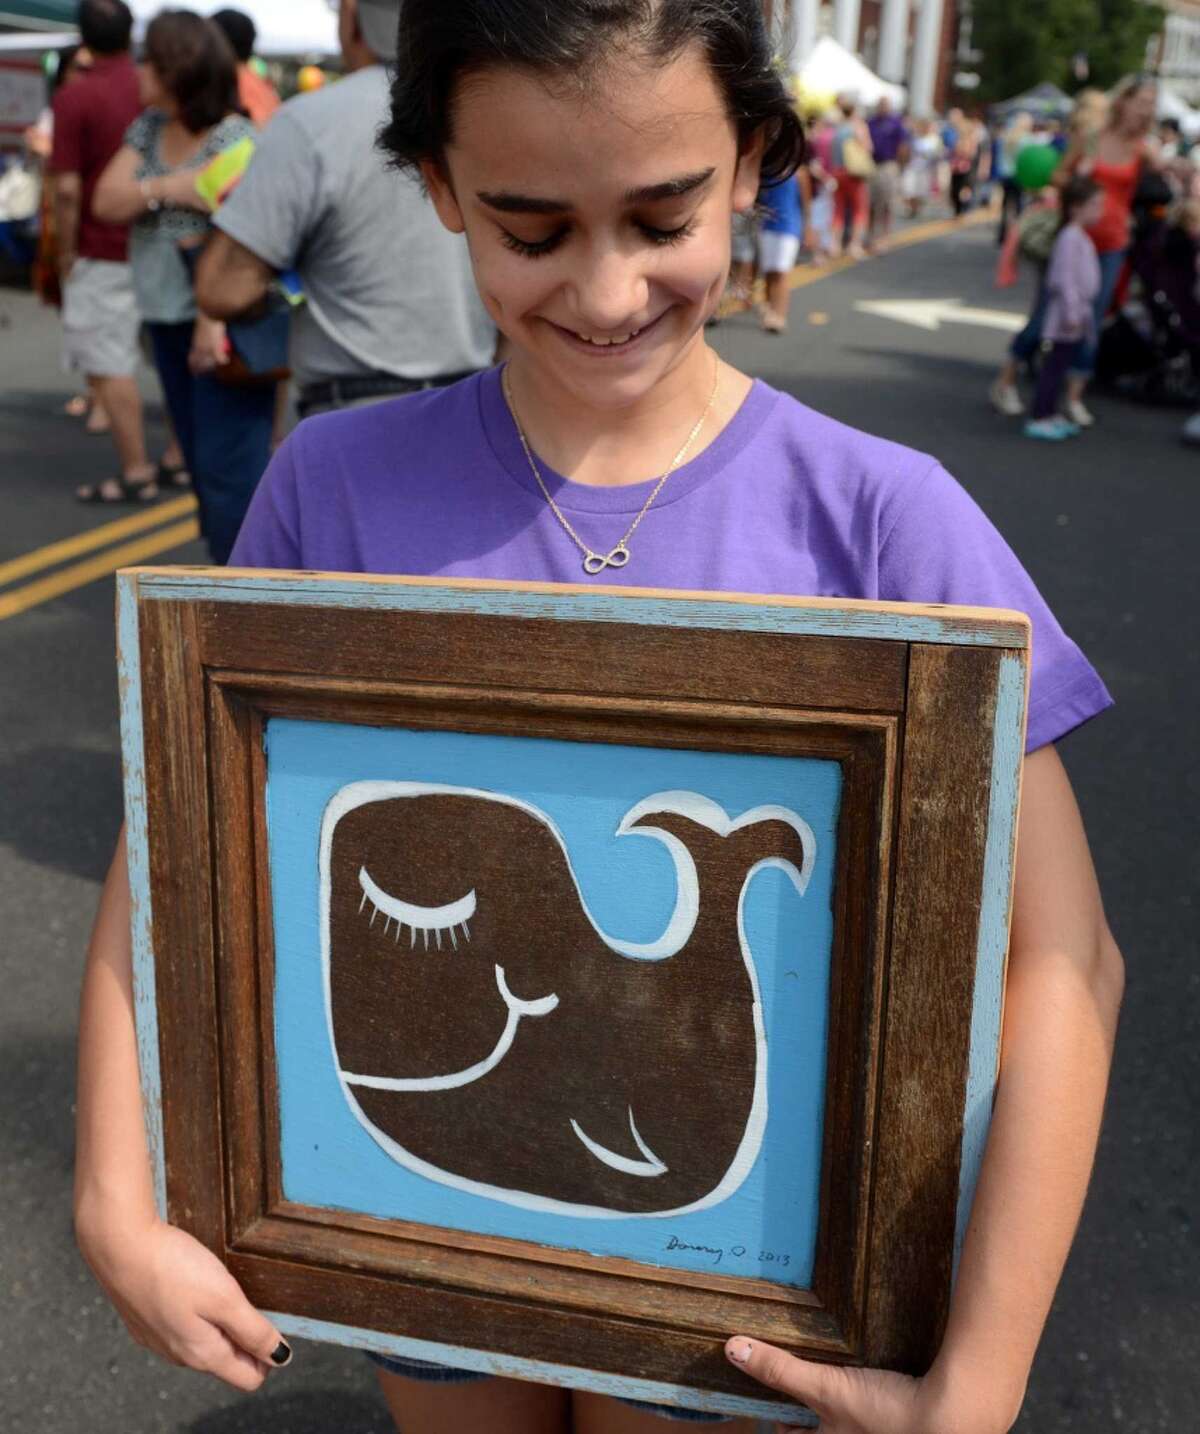 Emily Lobosco, 12, of Tampa Fla., visiting family in Norwalk, carries her newly purchased painting, by artist Daniel "Danny O" O'Connor, during the 38th annual SoNo Arts Celebration Saturday, Aug. 3, 2013 in Norwalk's Historic District at S. Main and Washington streets.